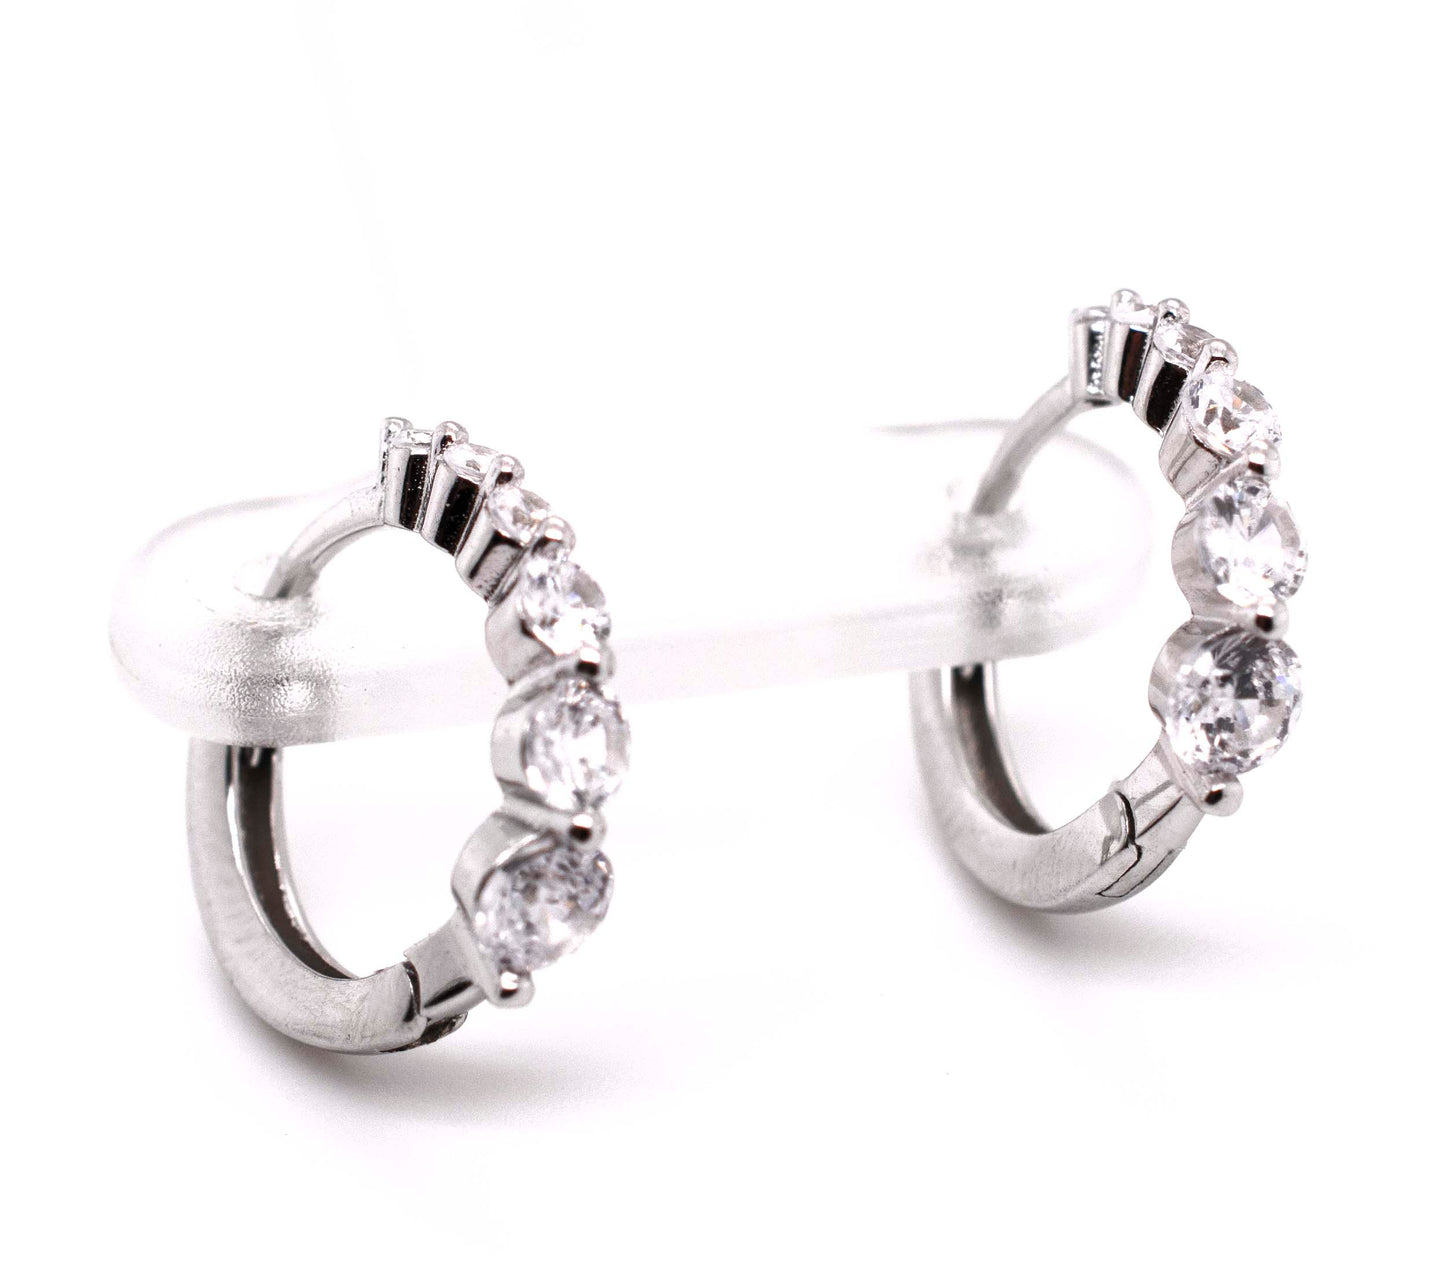 A pair of Small Cubic Zirconia Hoops from Super Silver.